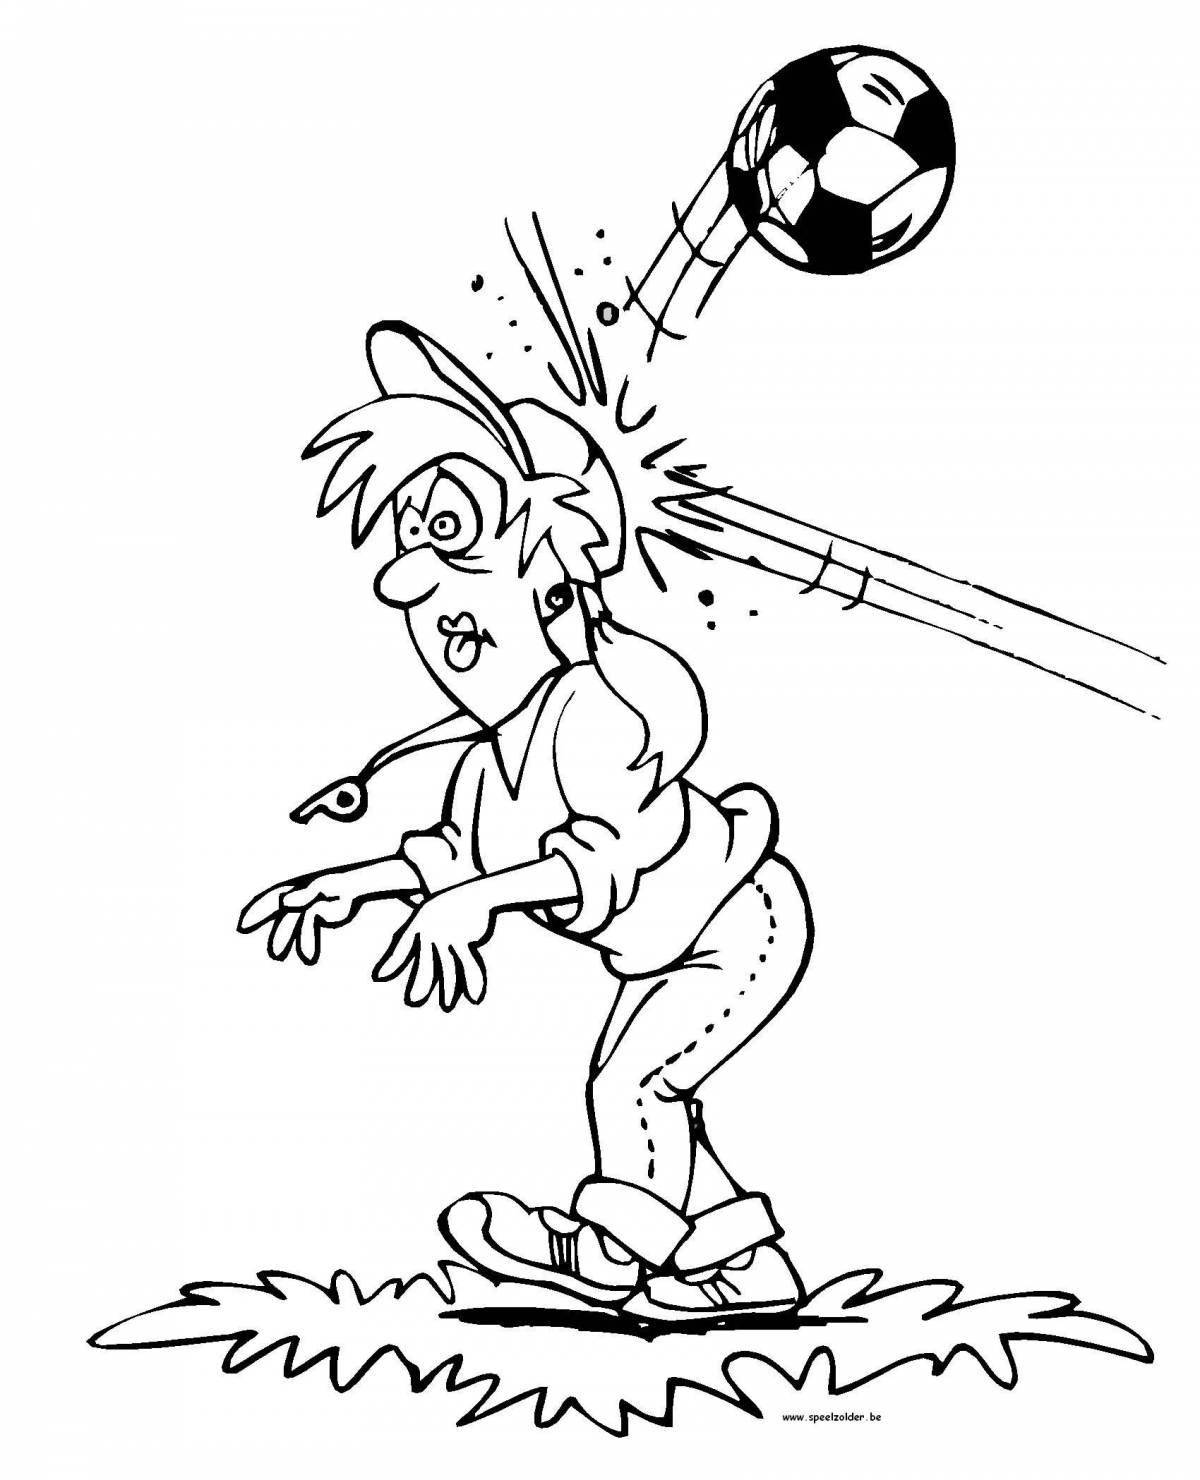 Exquisite football coloring book